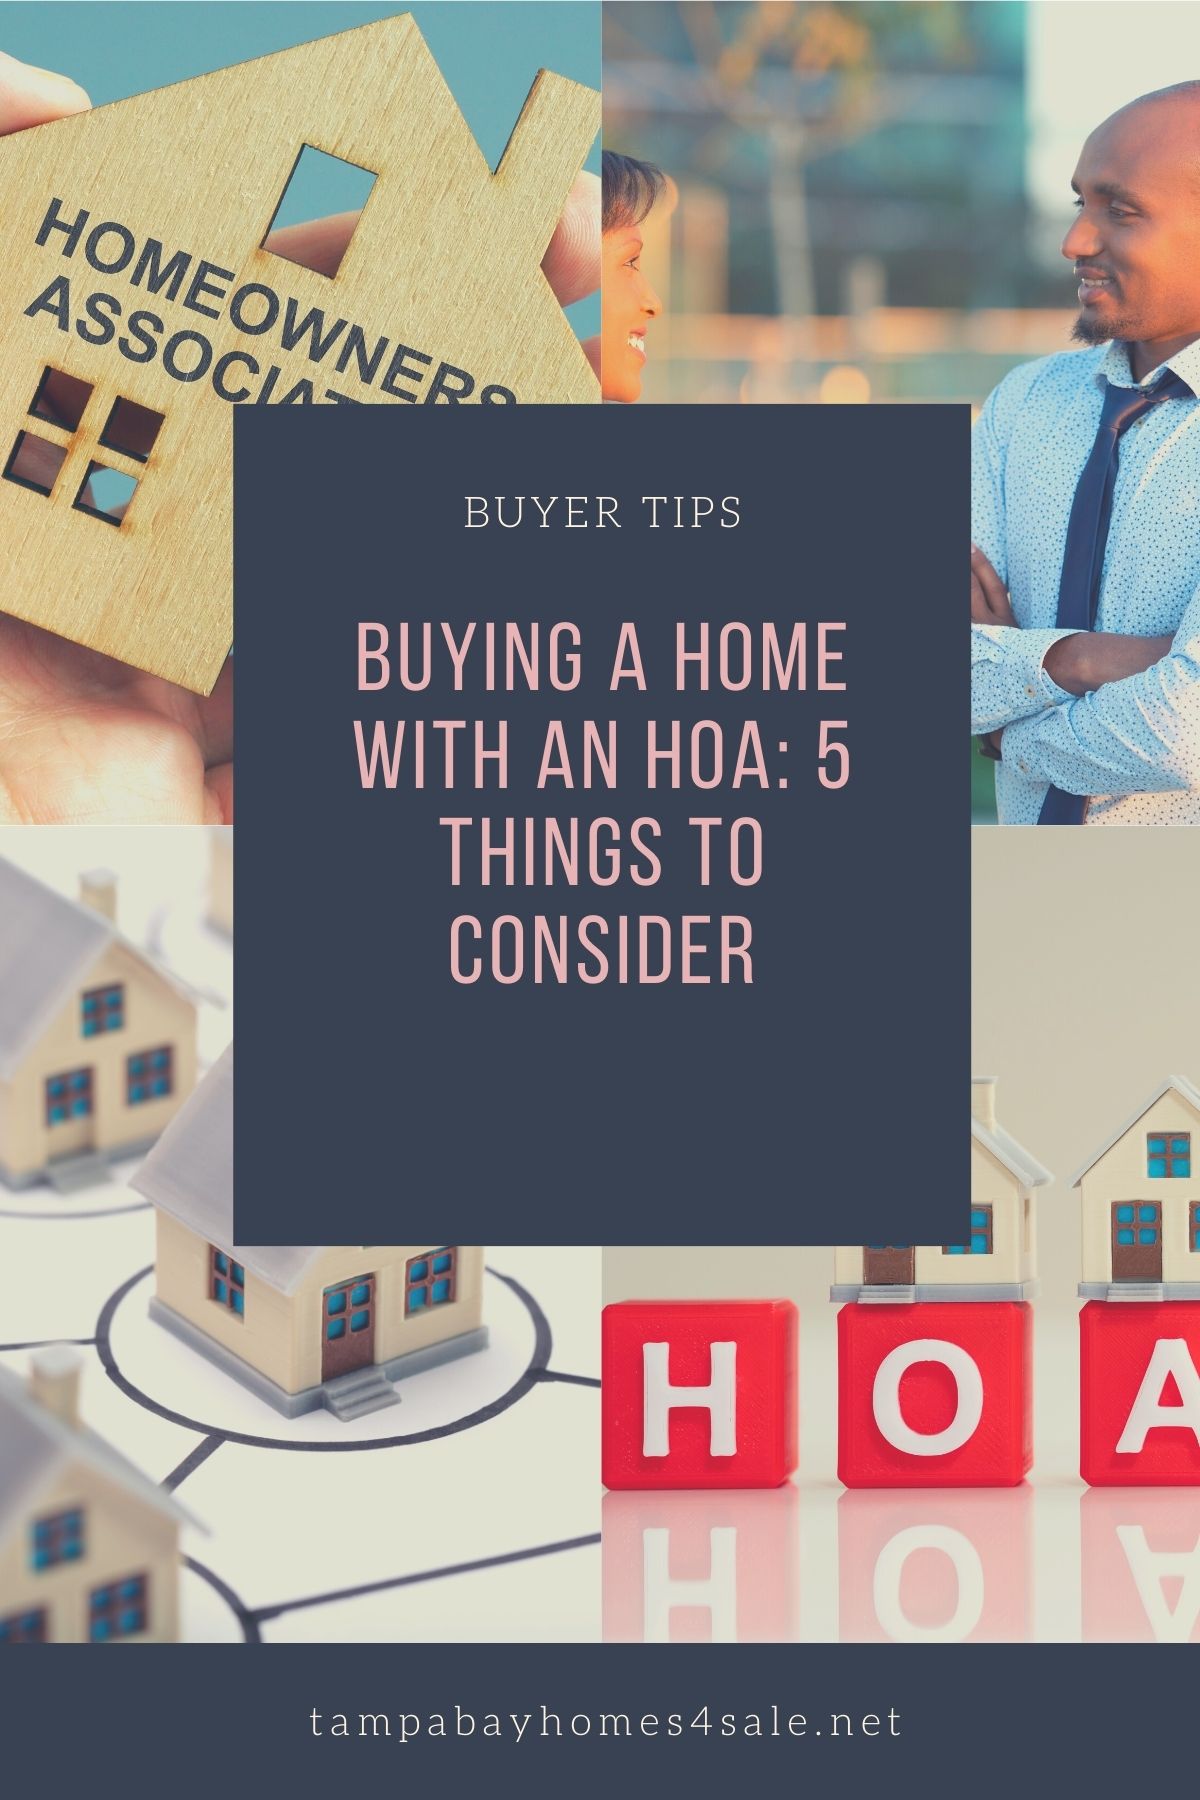 Buying a Home with an HOA: 5 Things to Consider